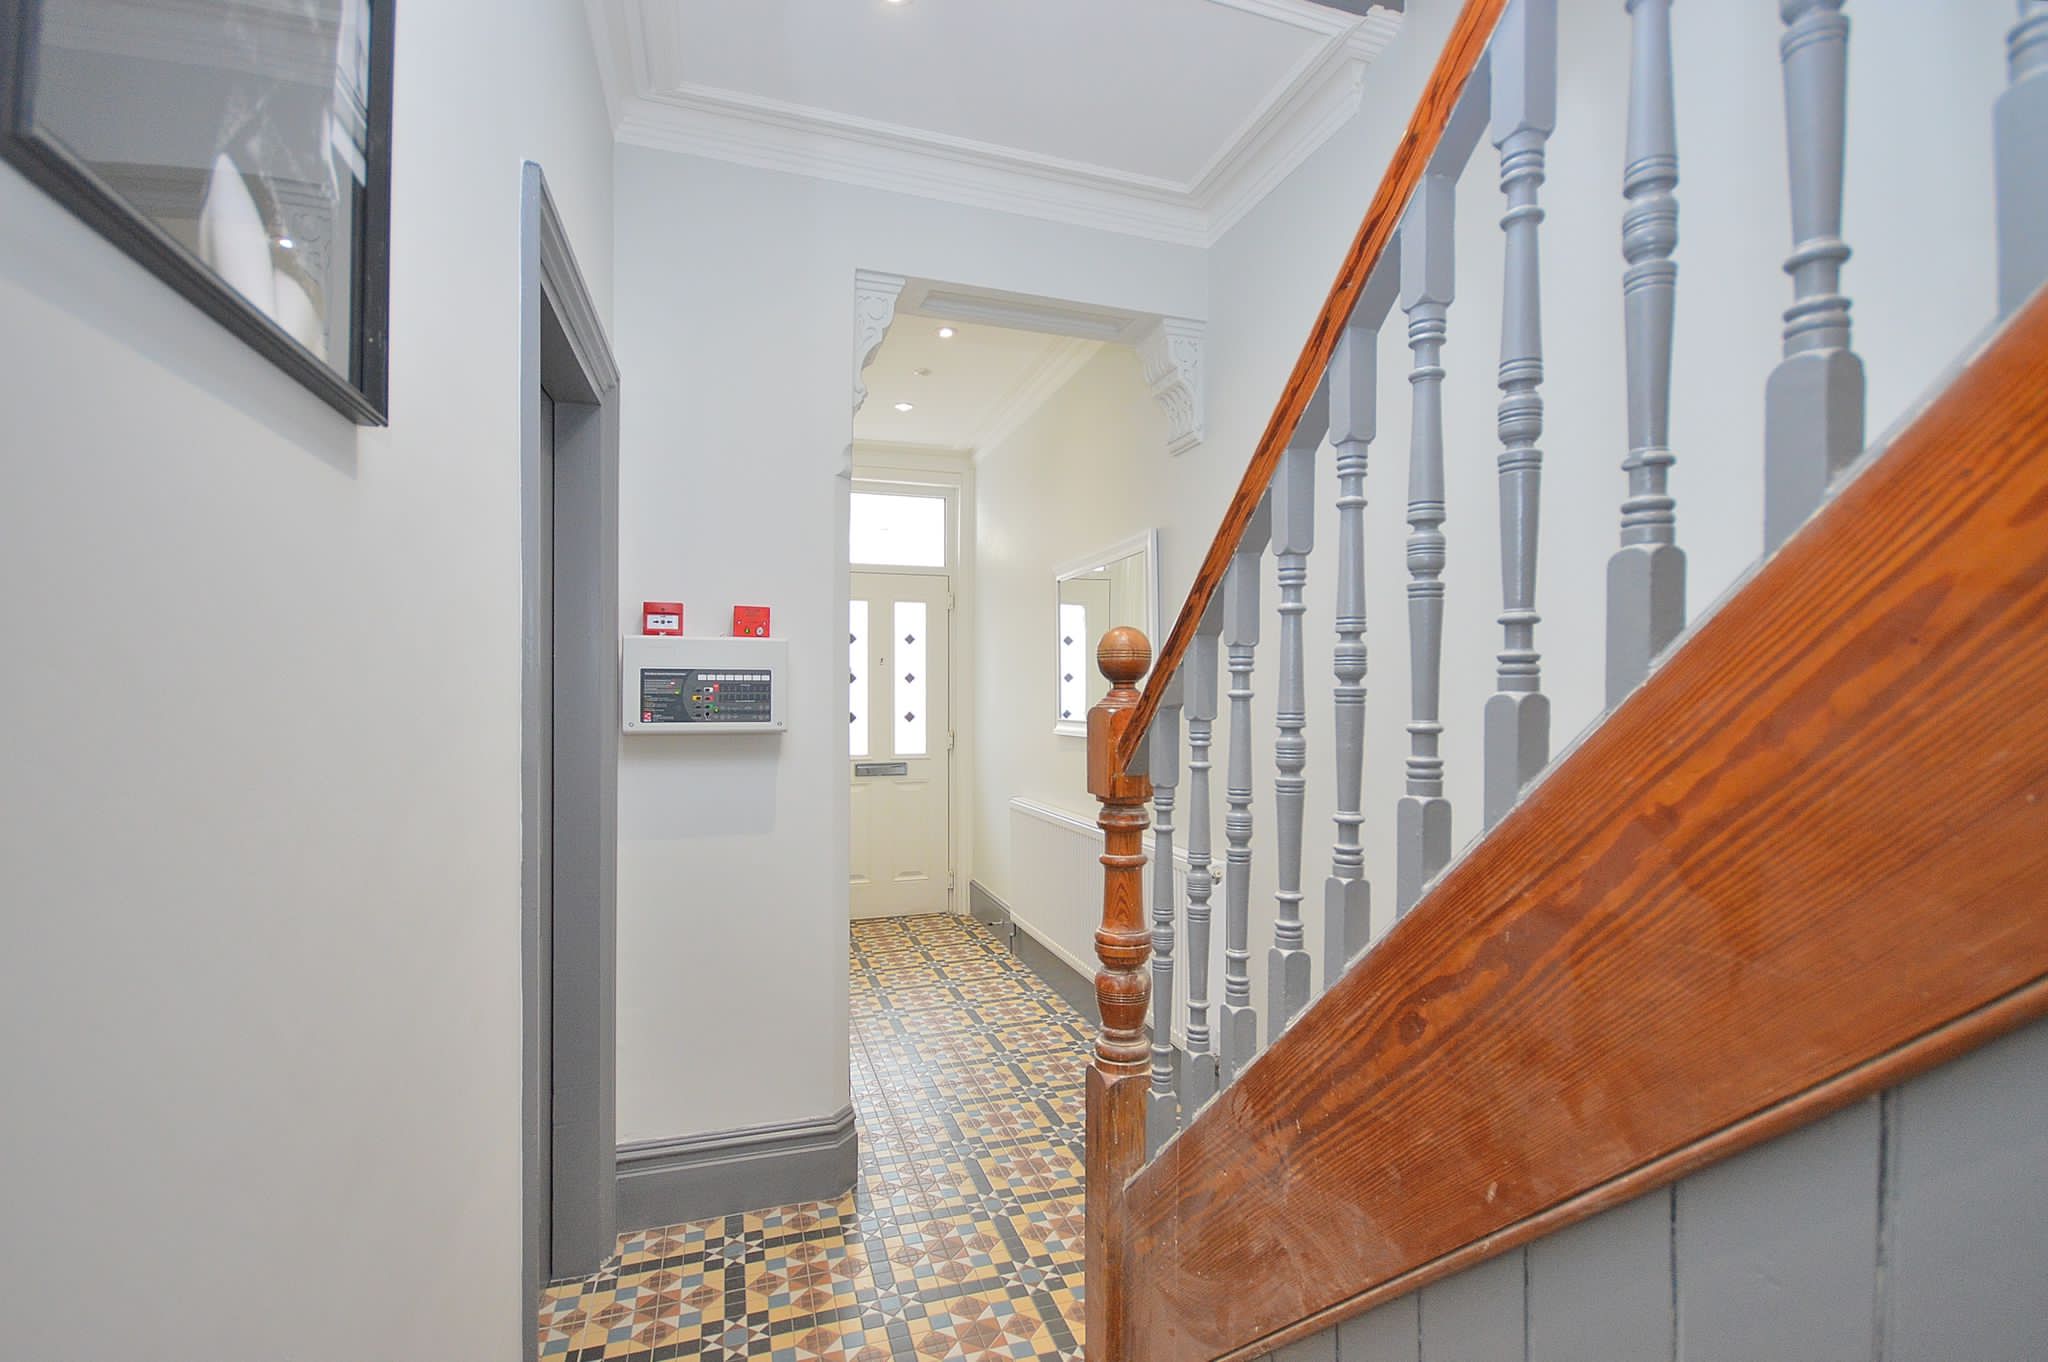 Hmo project at holly road - Stair